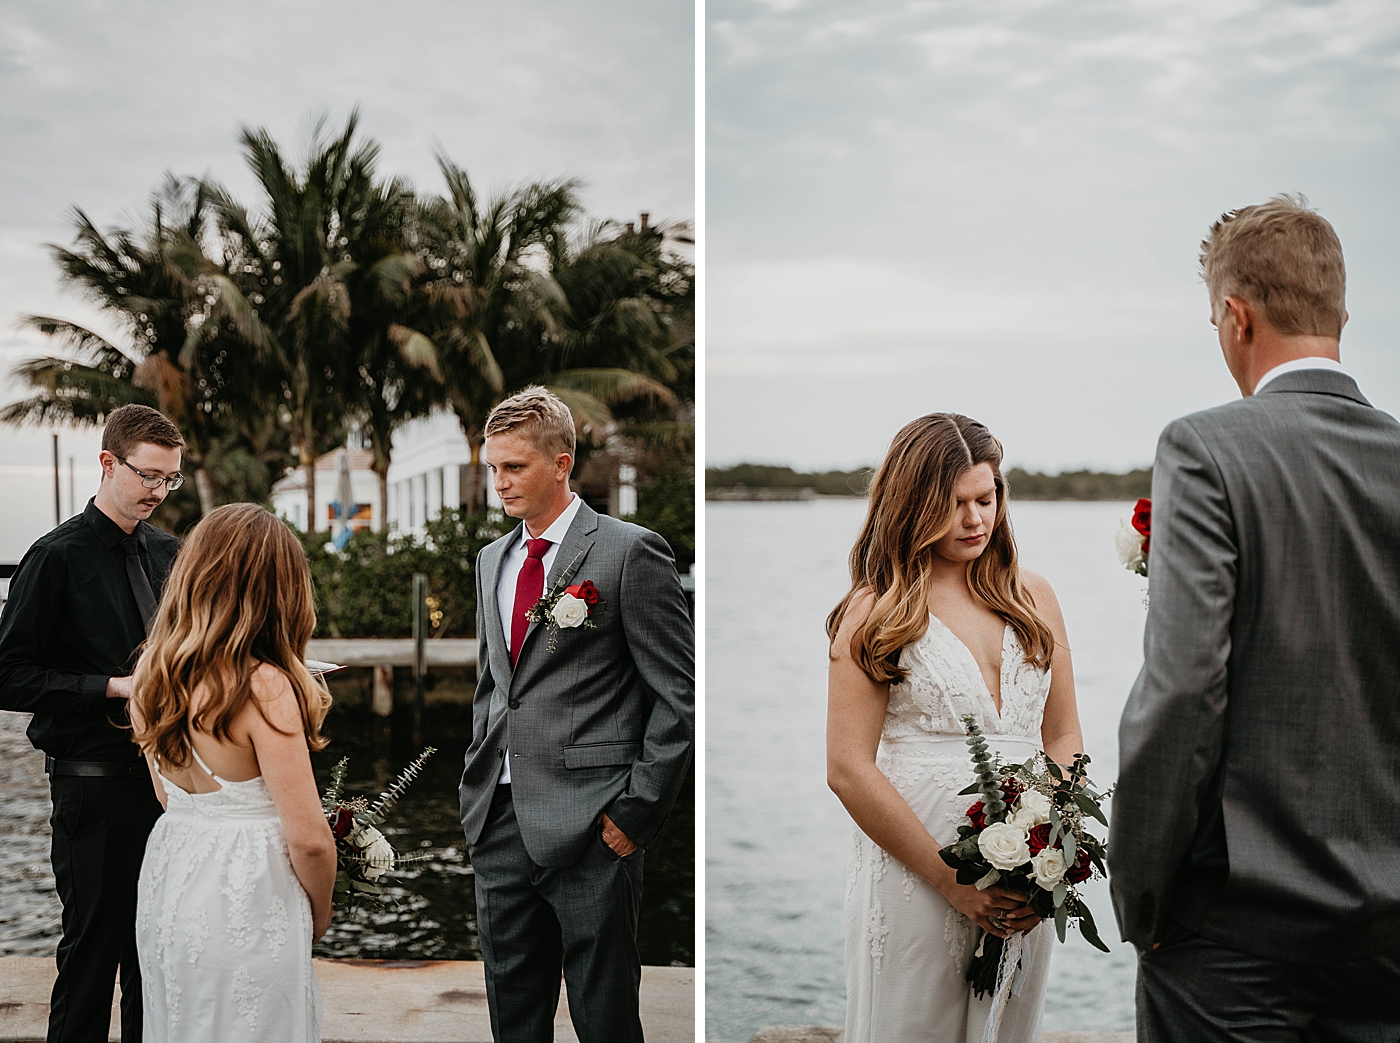 Bride and Groom exchanging vows South Florida Elopement Photography captured by Krystal Capone Photography